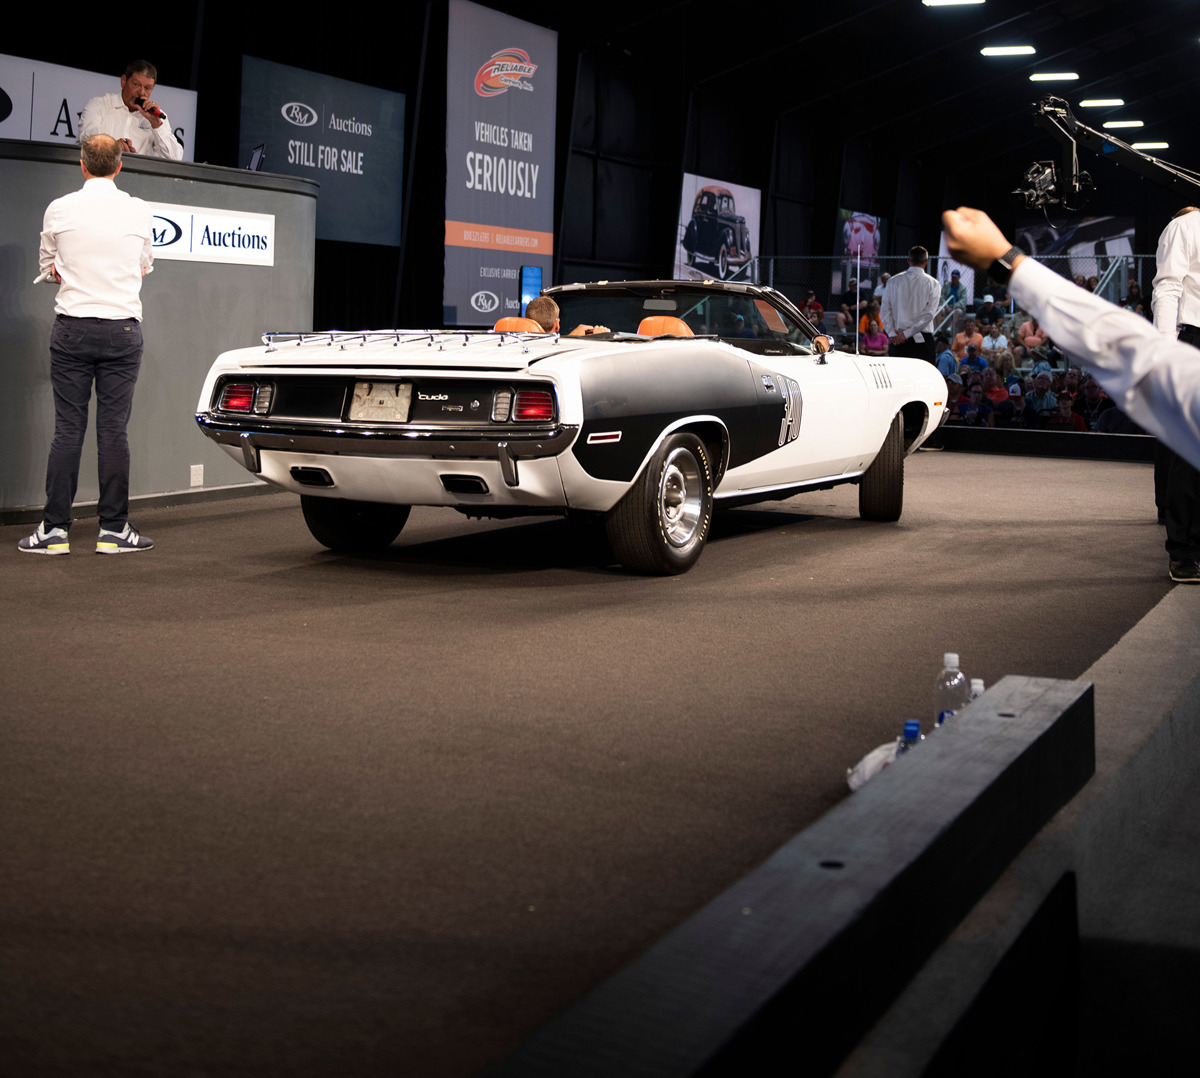 1971 Plymouth ’Cuda Convertible offered at RM Sotheby’s Auburn Fall live auction 2019